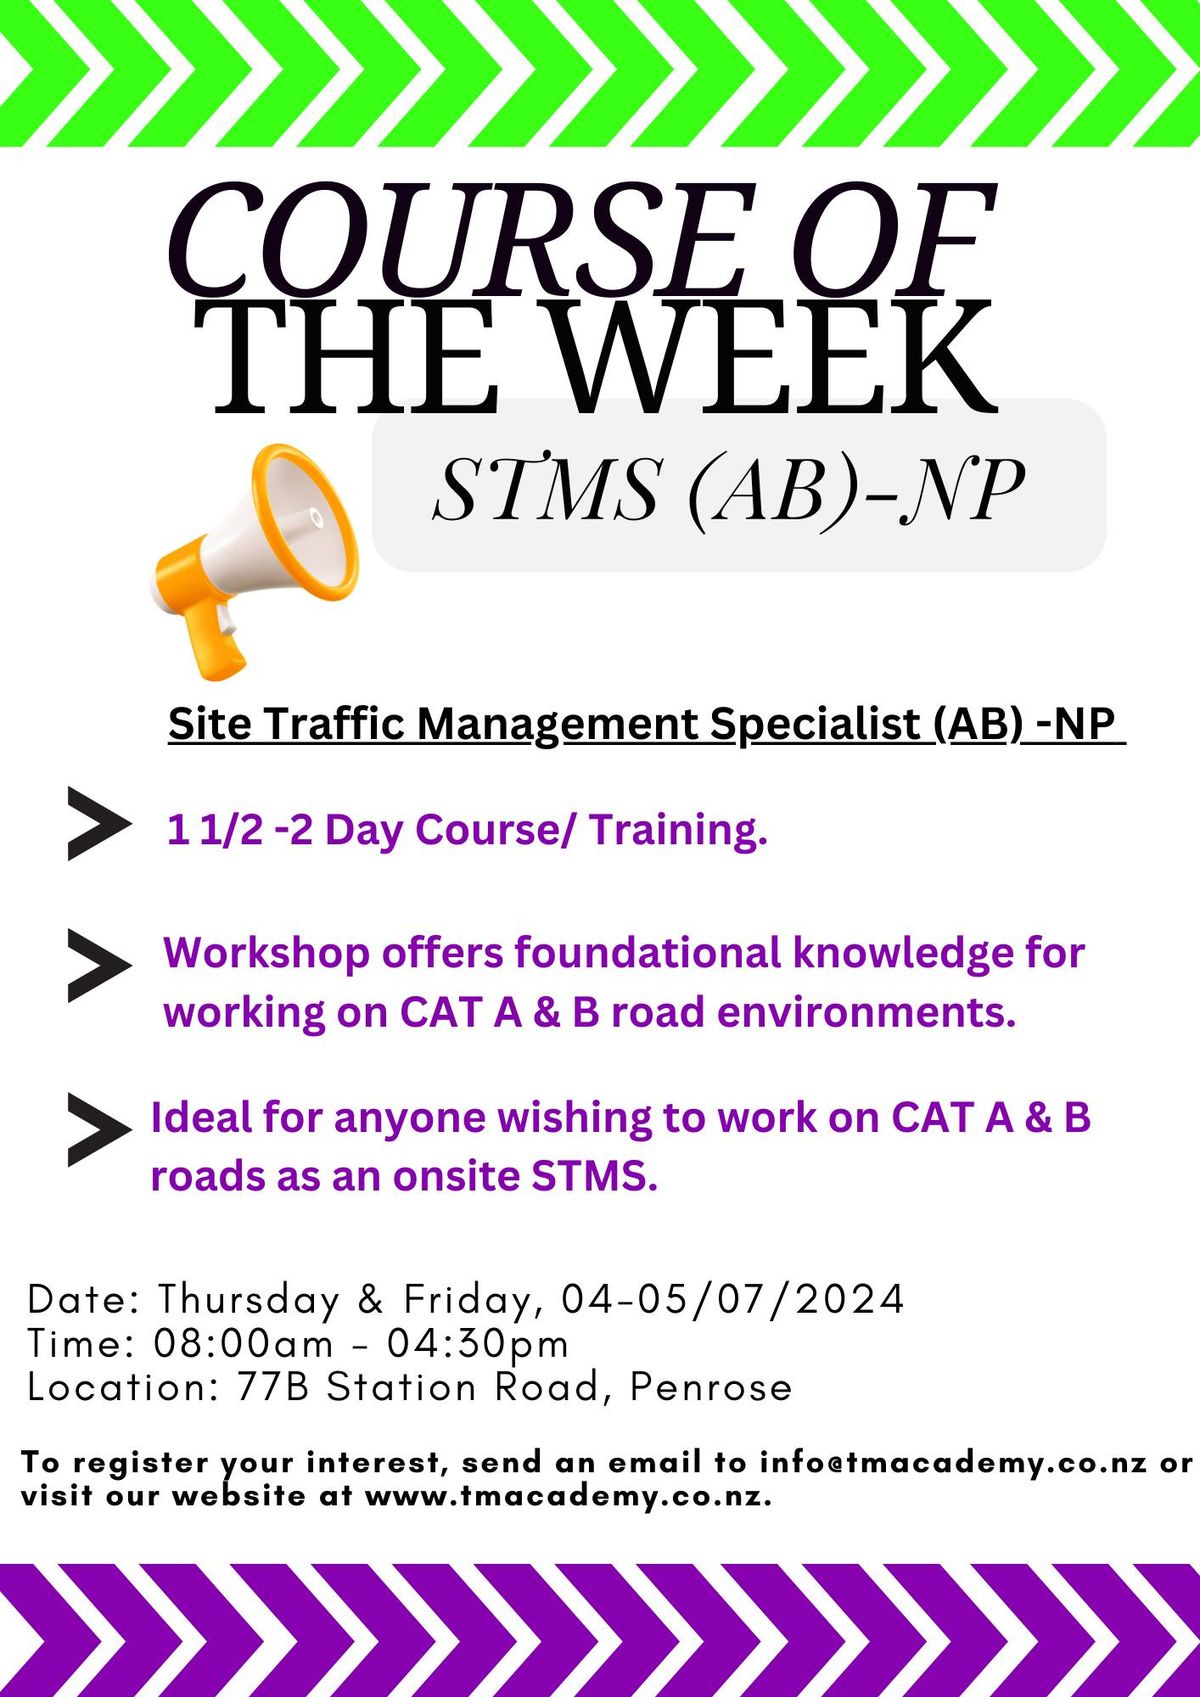 STMS (AB)-NP <Site Traffic Management Specialist (AB) Combined -Non Practicing> 